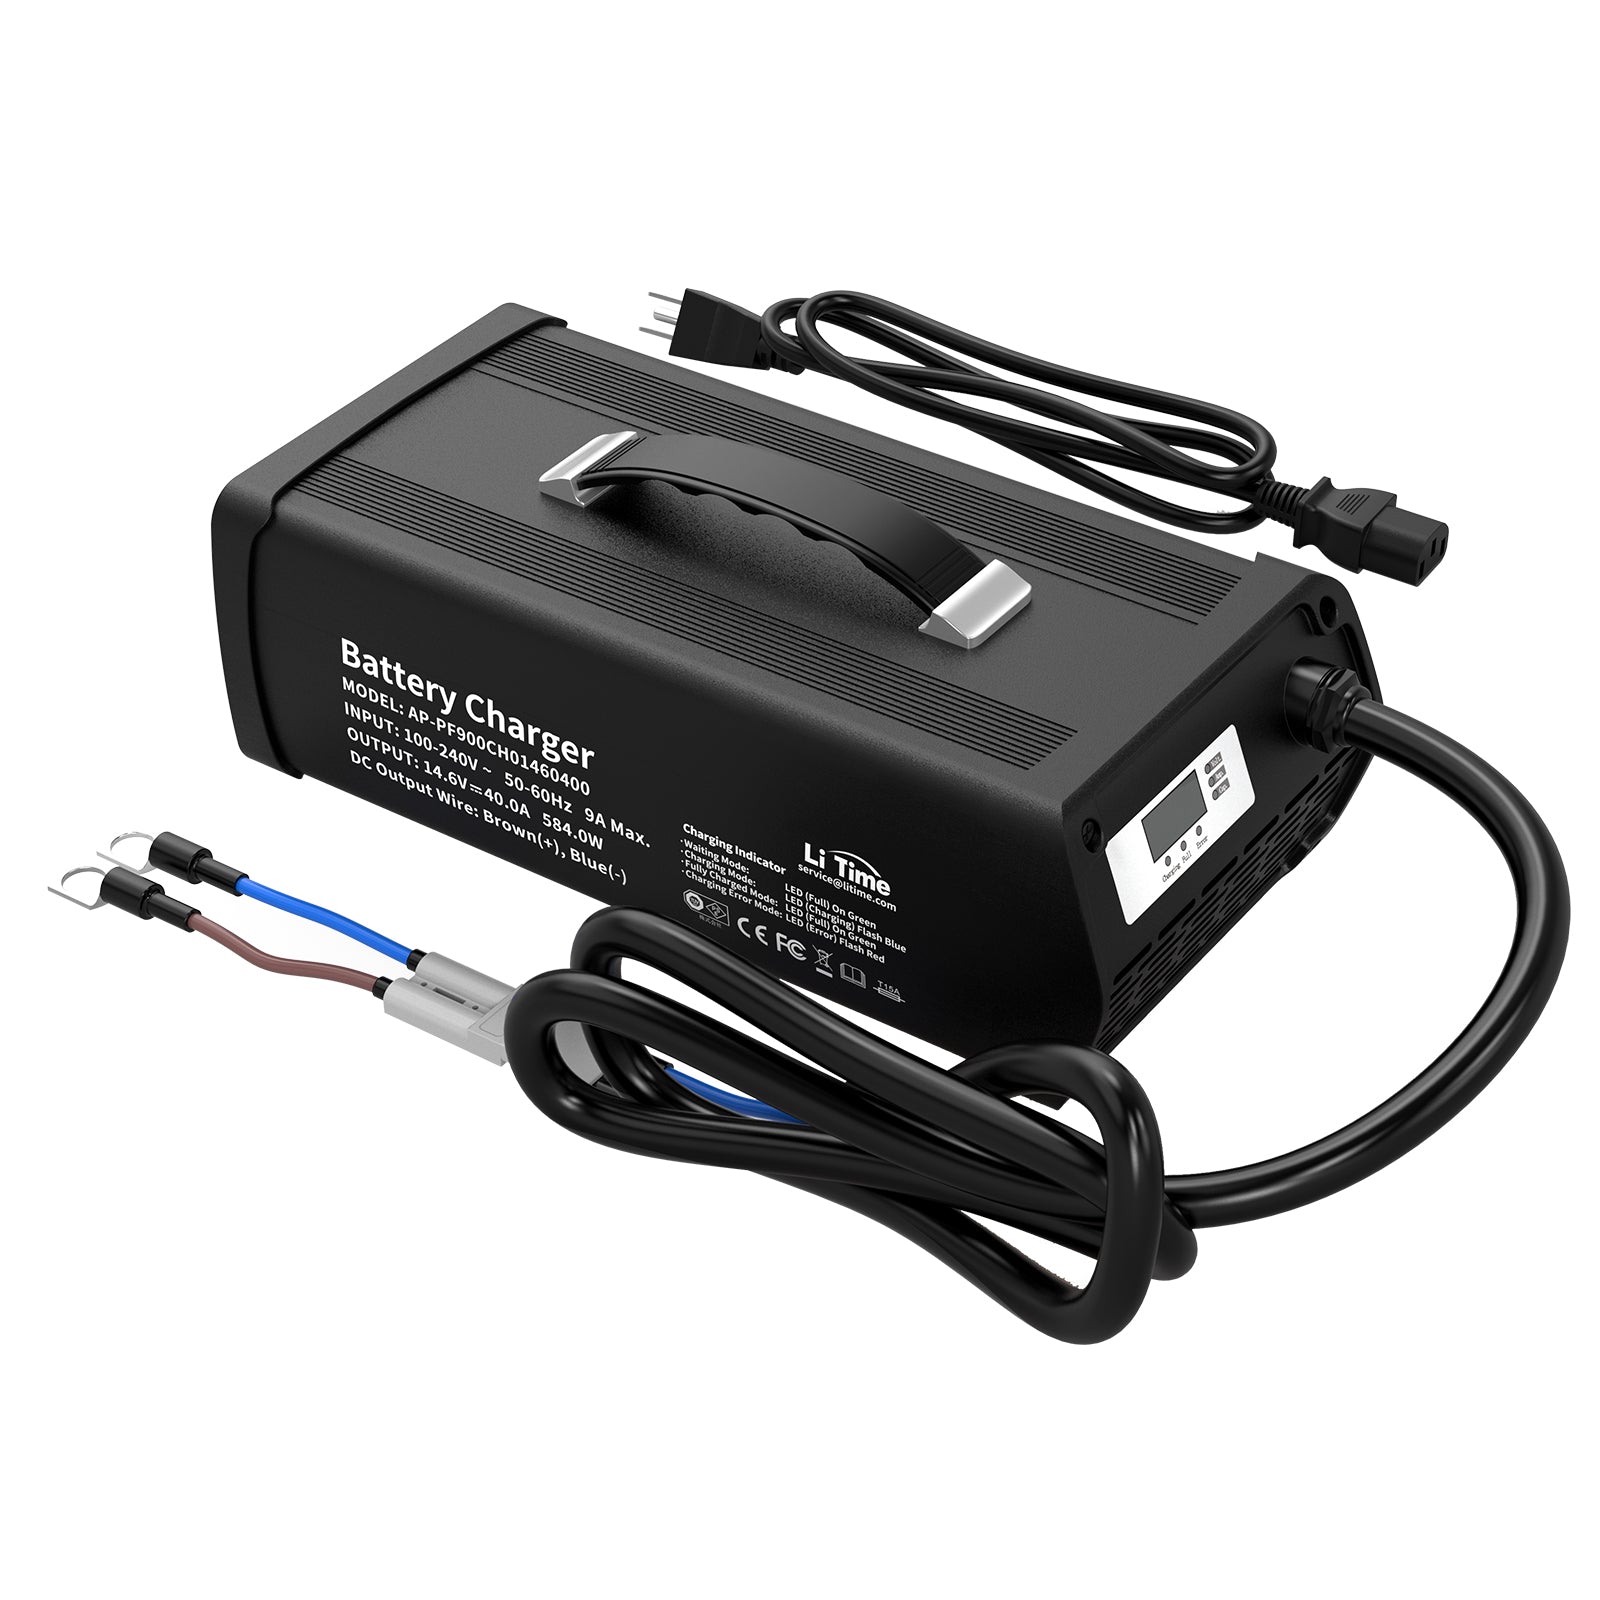 LiTime 14.6V 20A Lithium Battery Charger for 12V LiFePO4 Lithium Battery